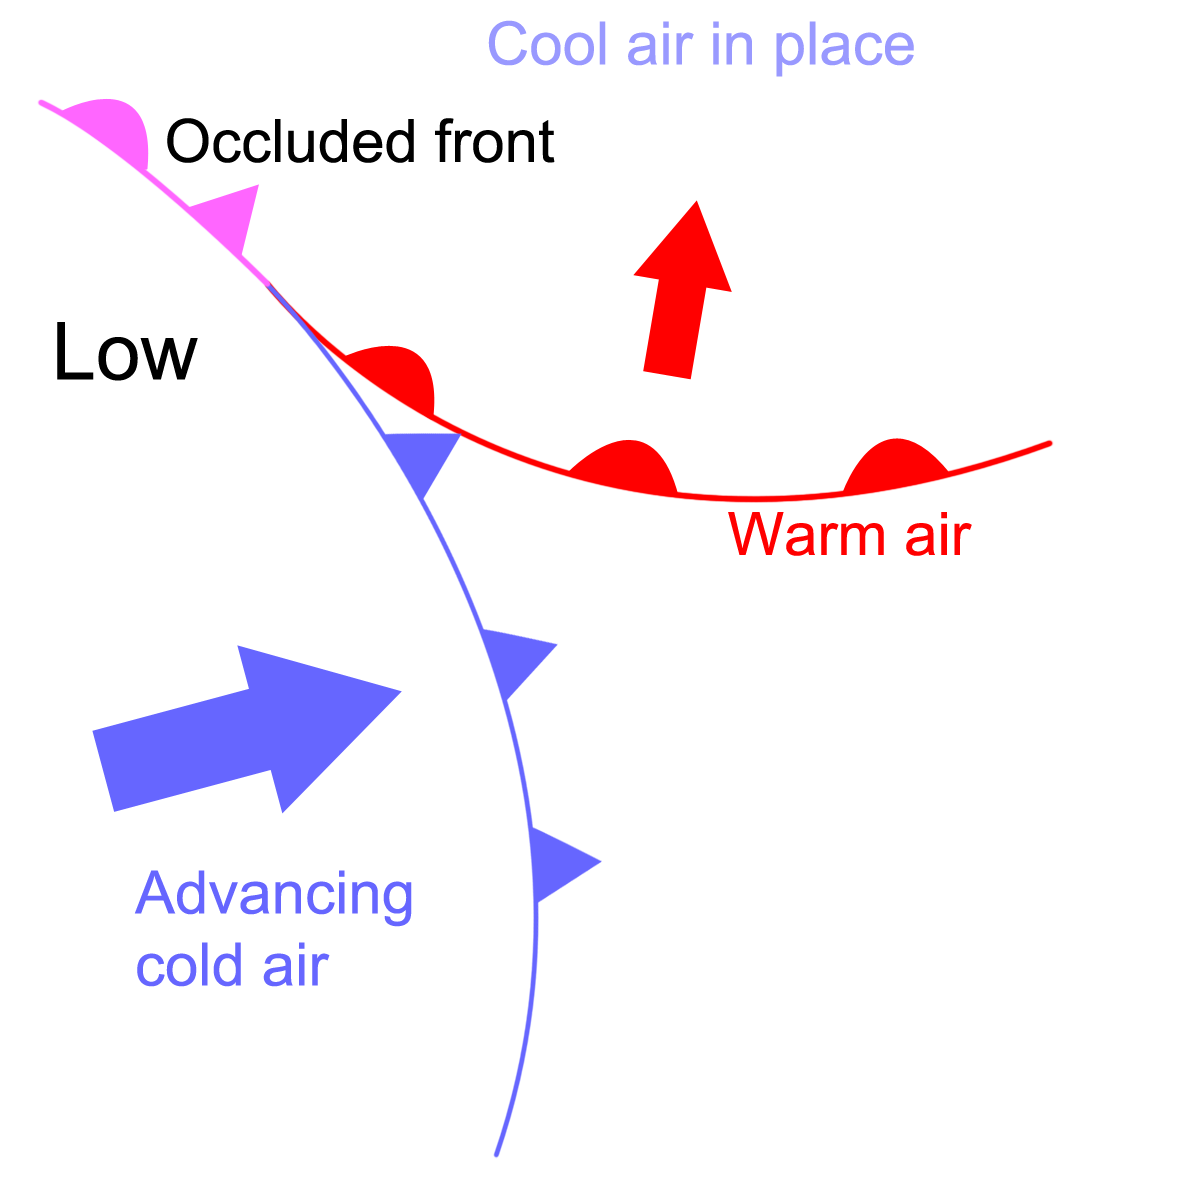 Diagram showing the formation of an occluded front